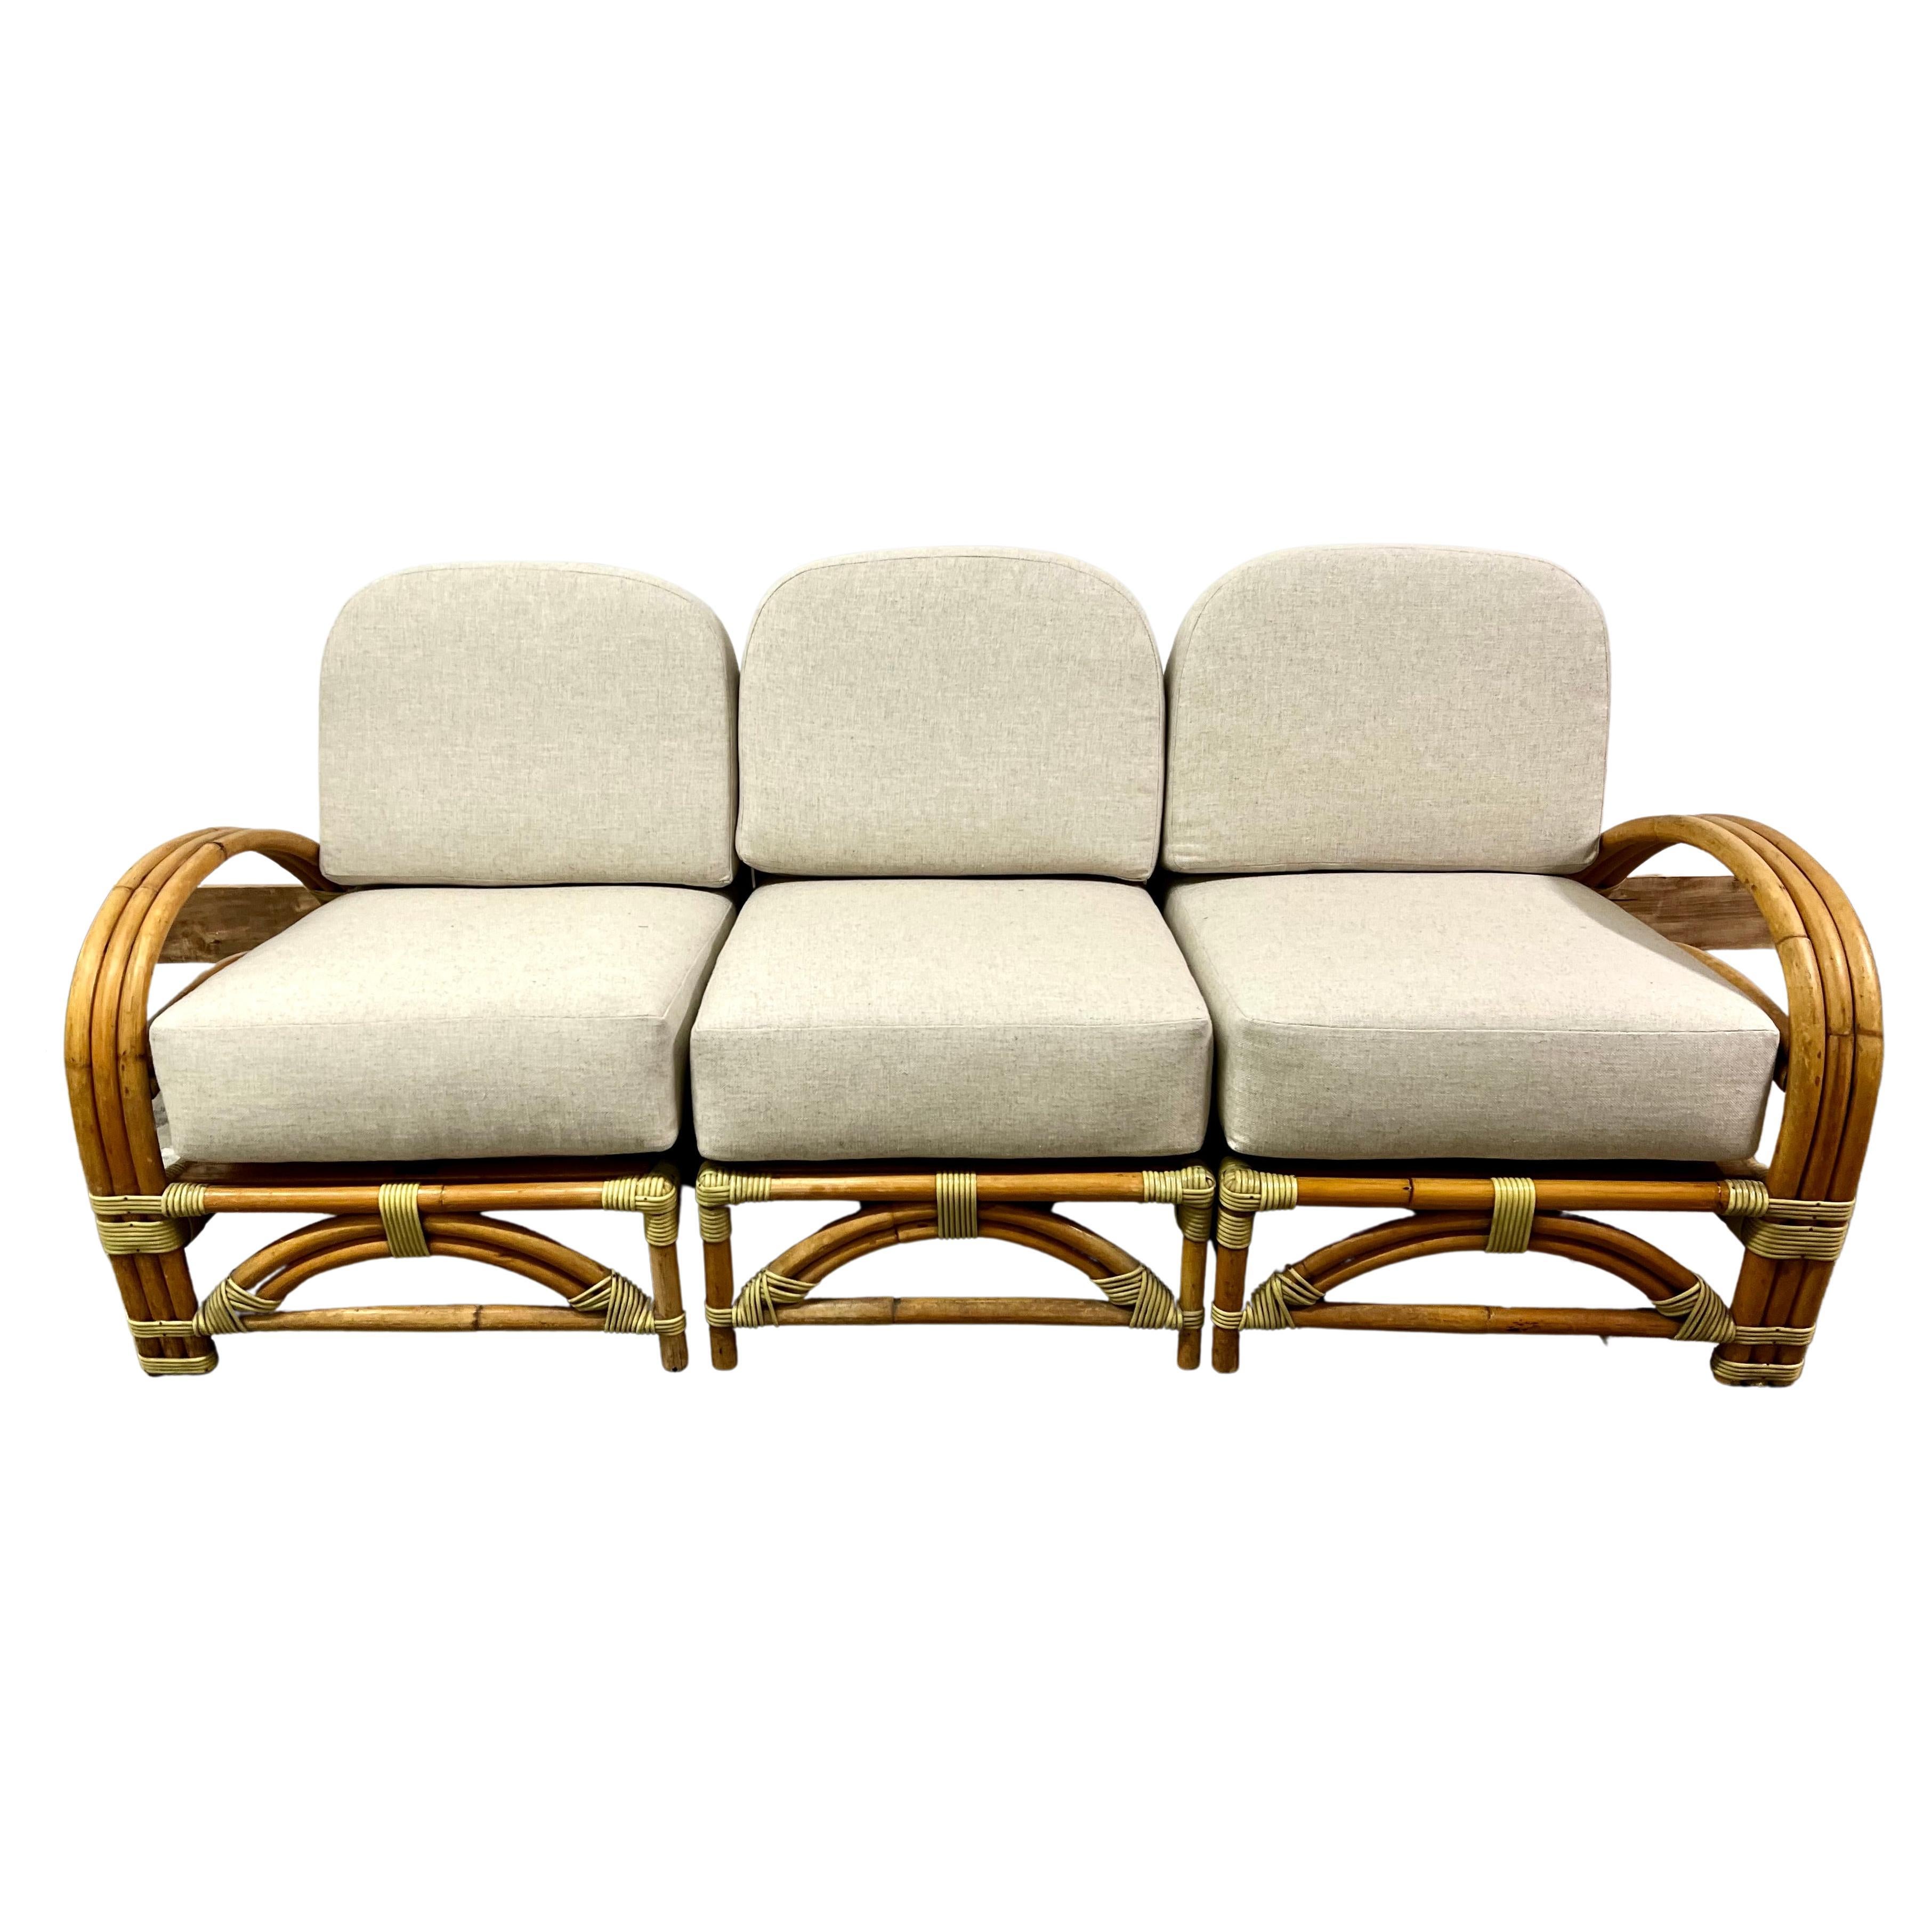 Ritts So. Rattan Sofa with Custom Upholstery For Sale